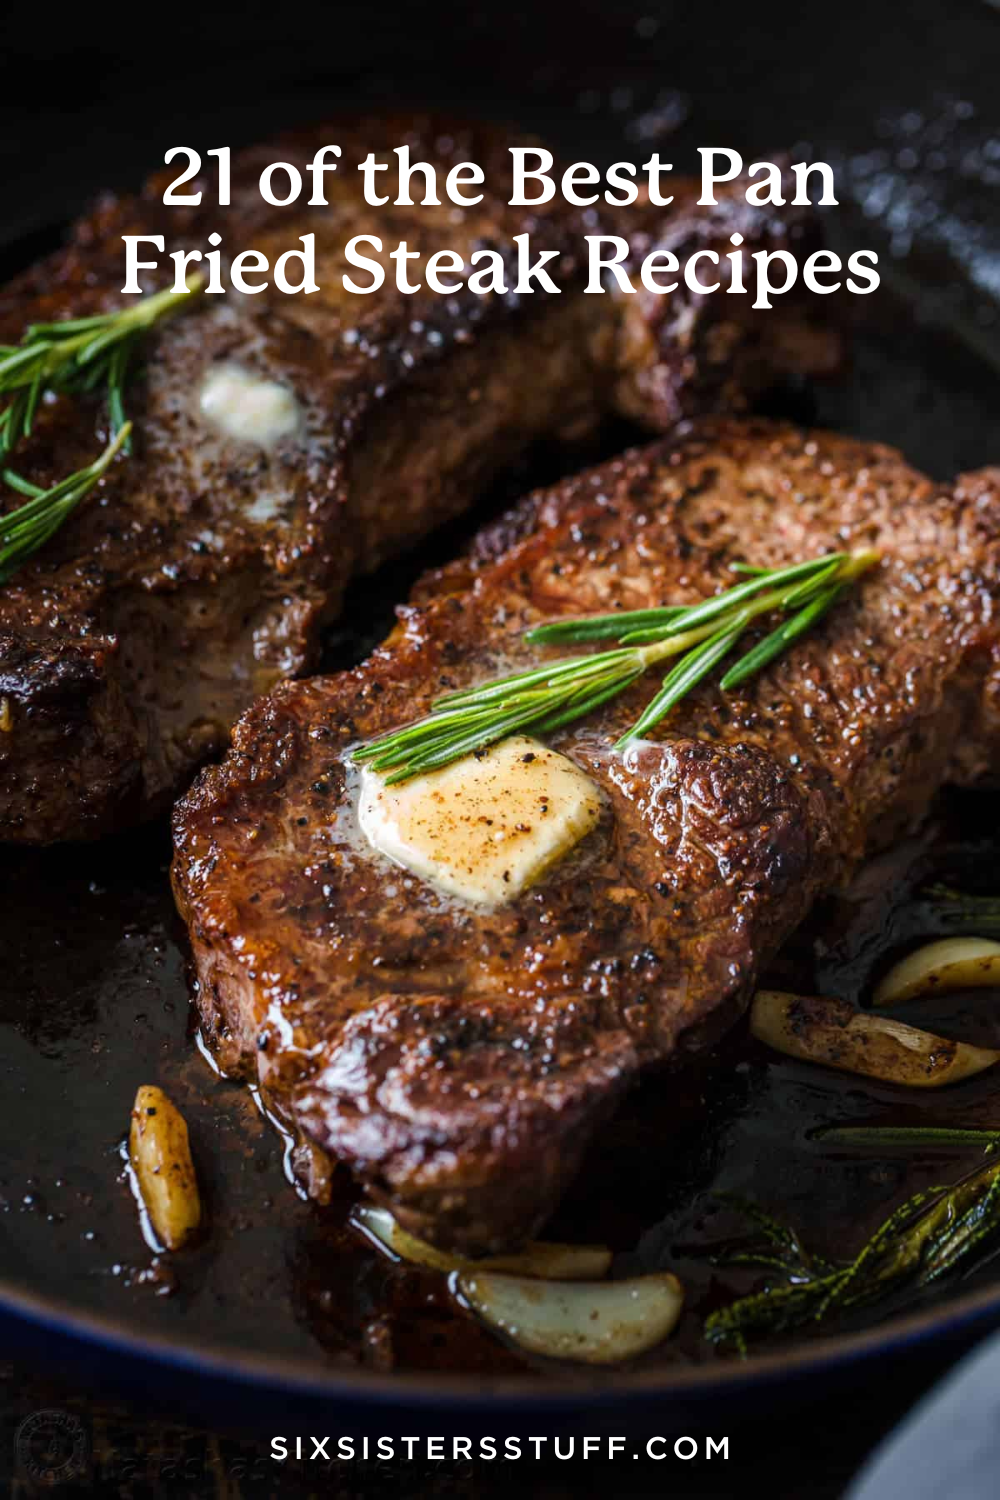 21 of the Best Pan Fried Steak Recipes